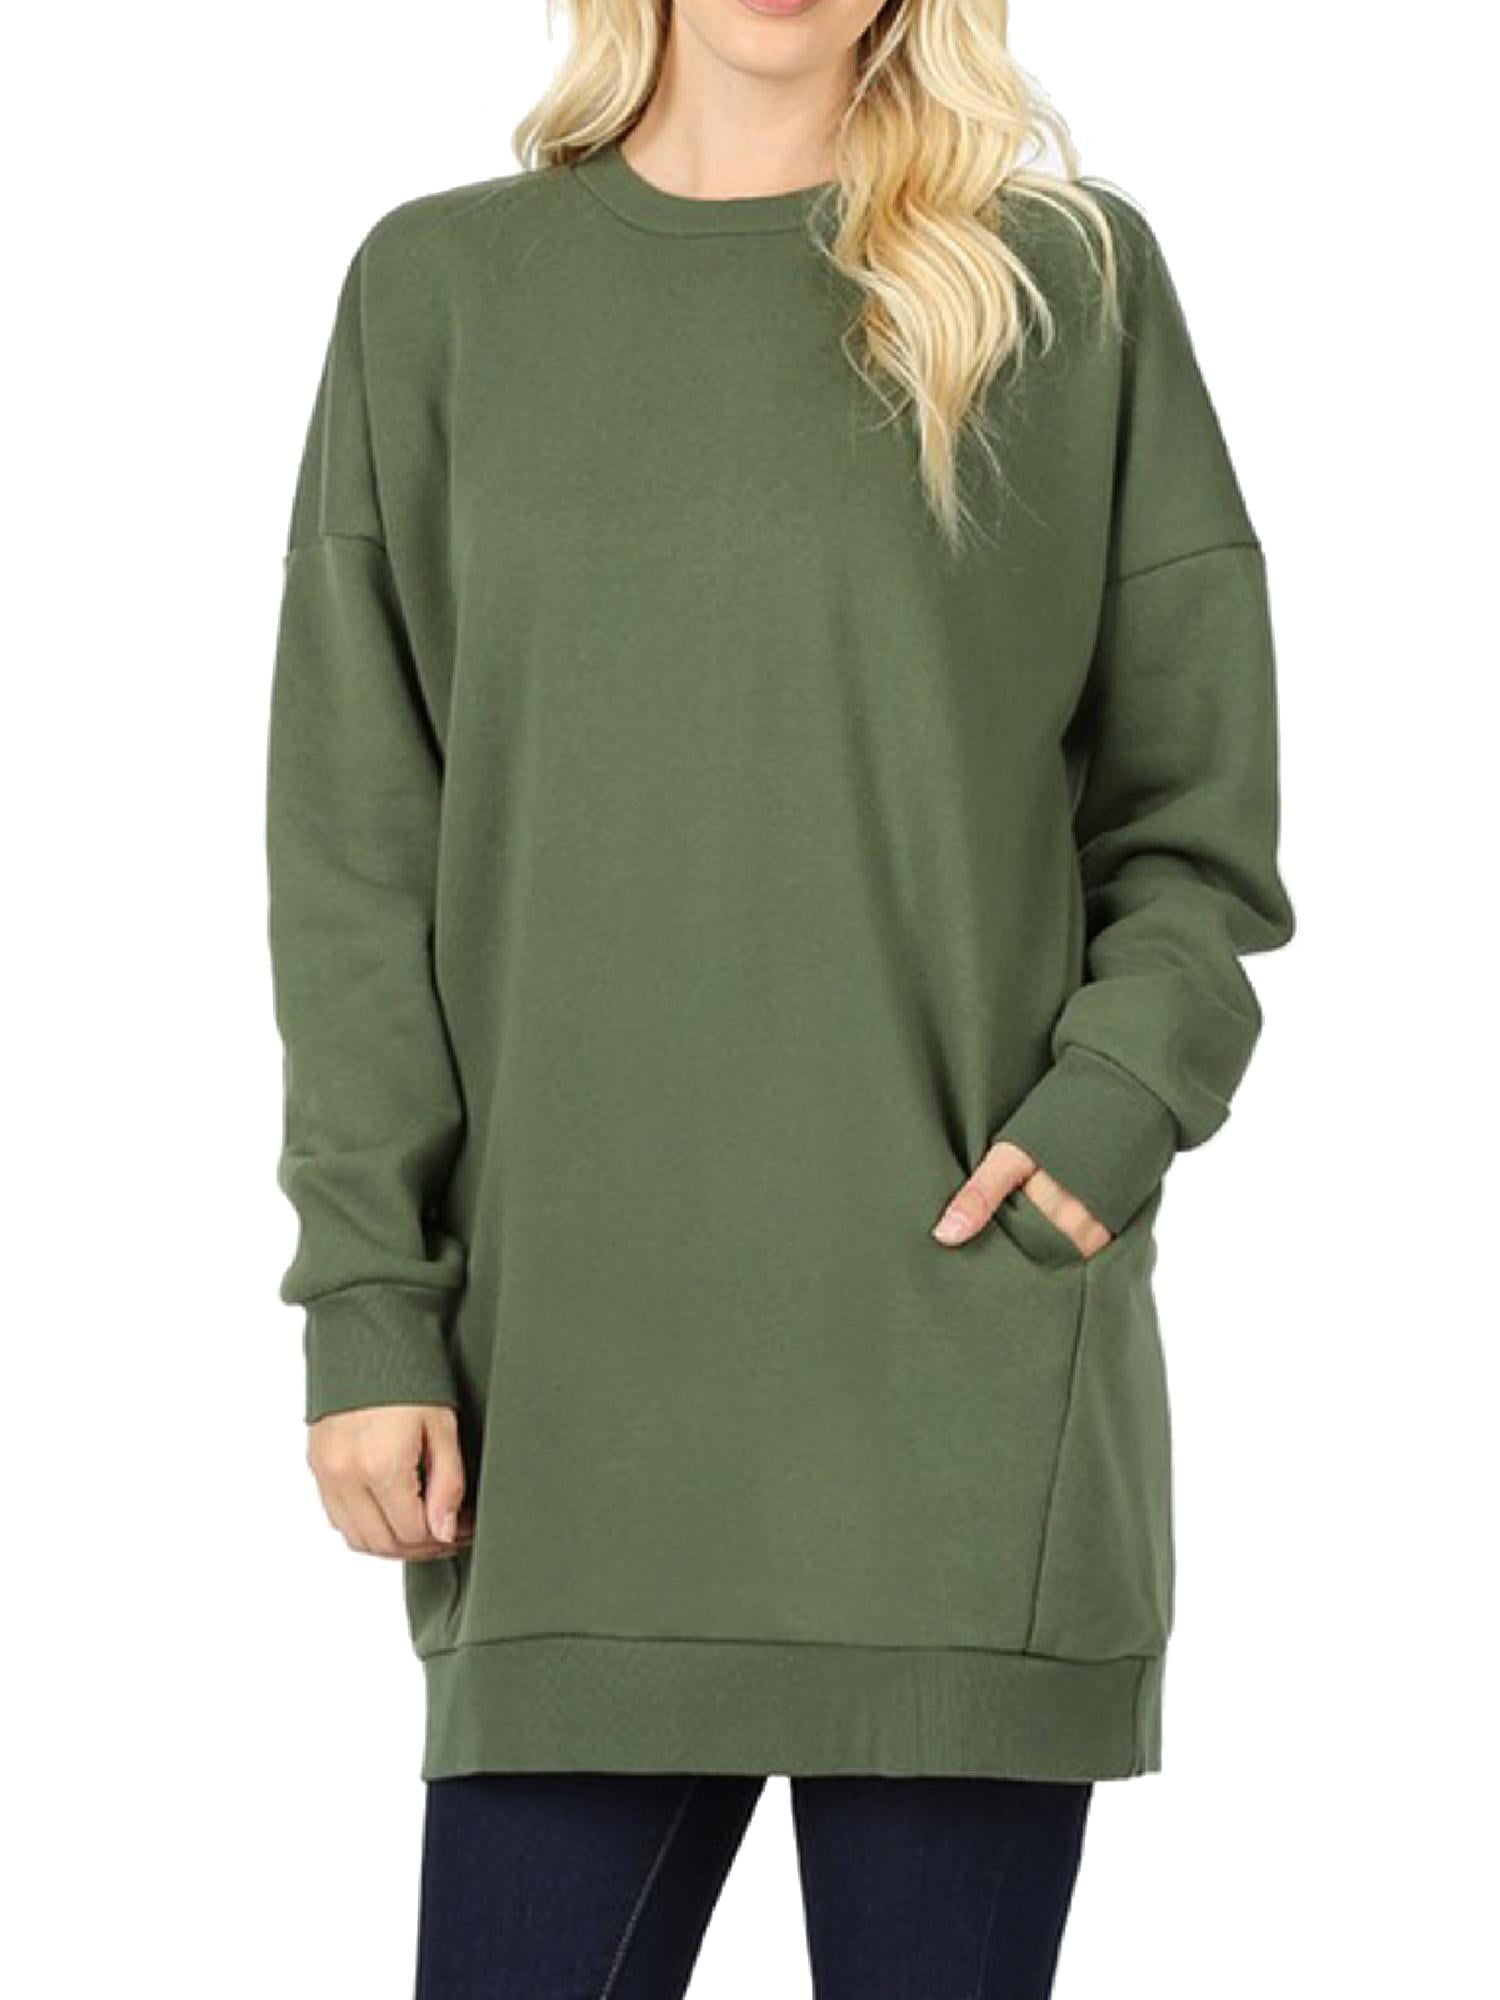 Made by Olivia Made by Olivia Women's Casual Oversized Crew Neck